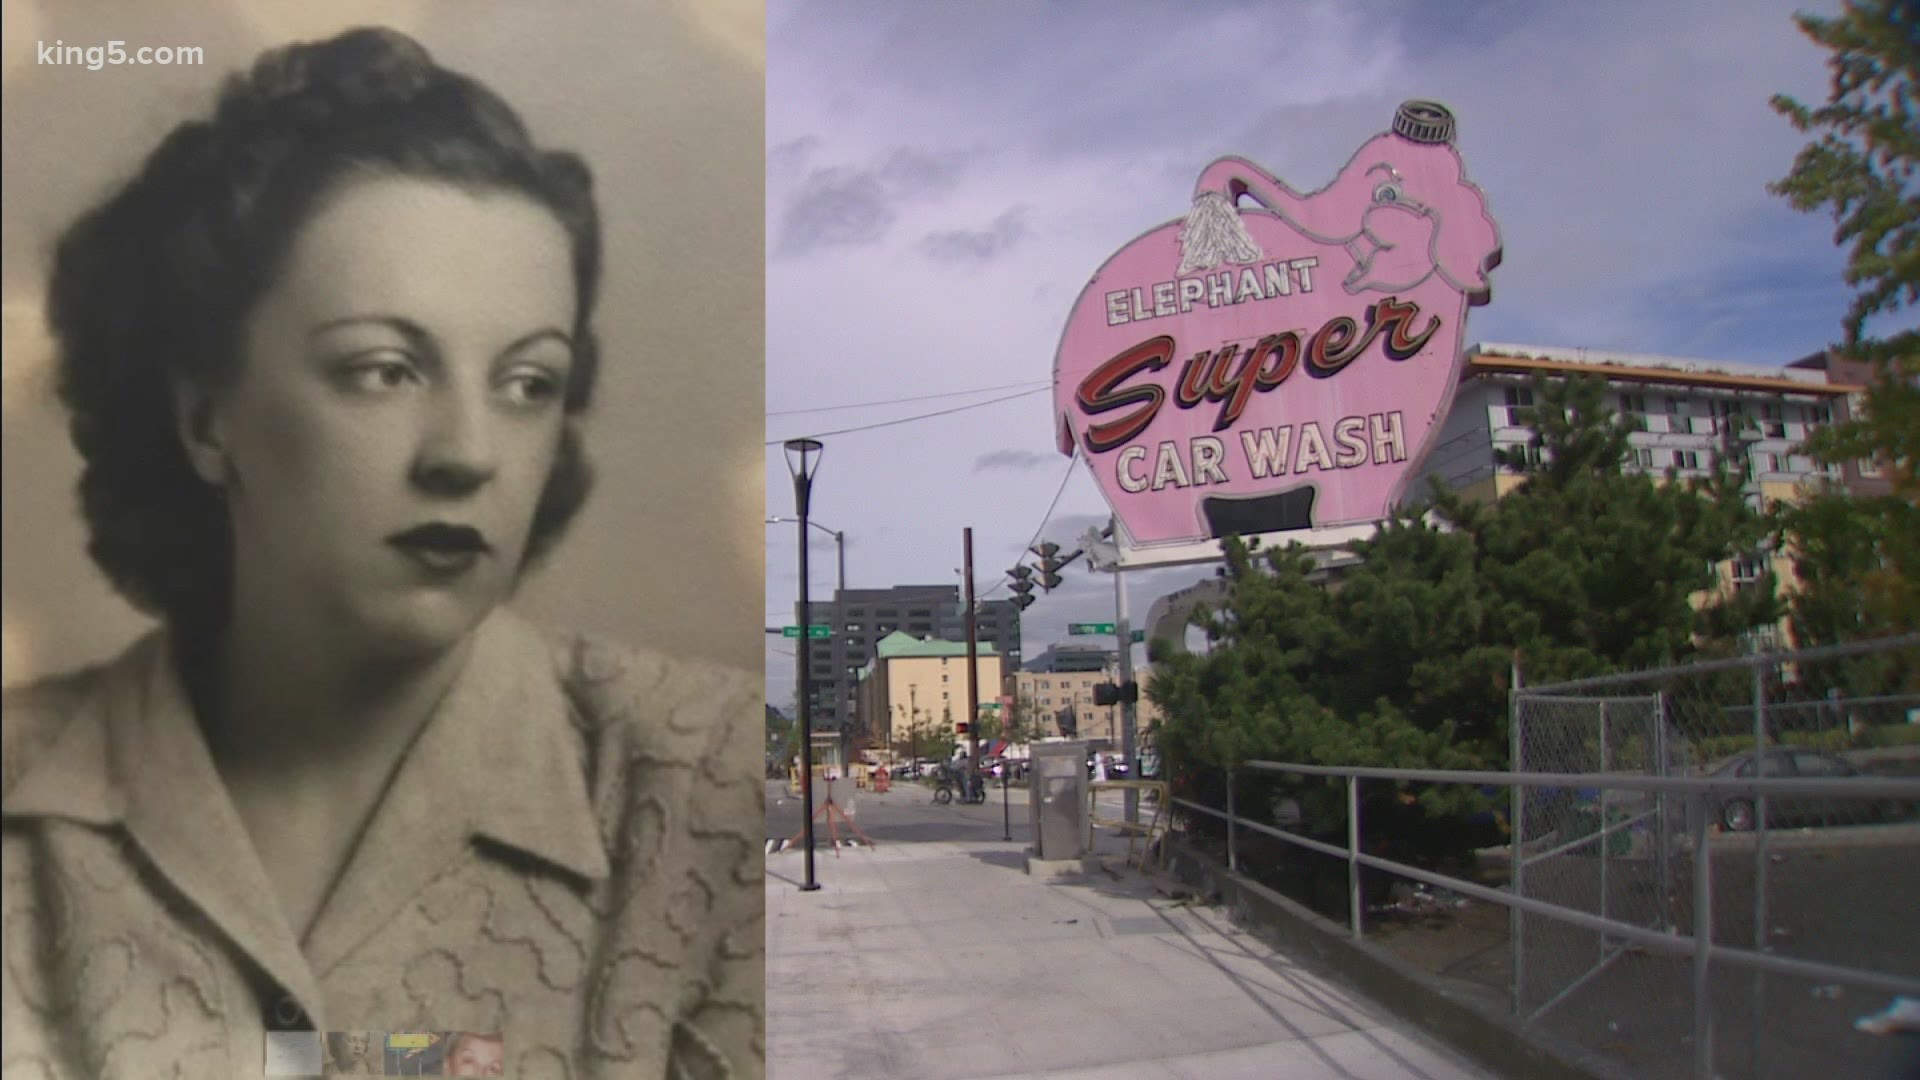 "These are the signs that define who we are," said Historian Brad Holden, on Seattle's iconic pink Elephant Car Wash closing down.